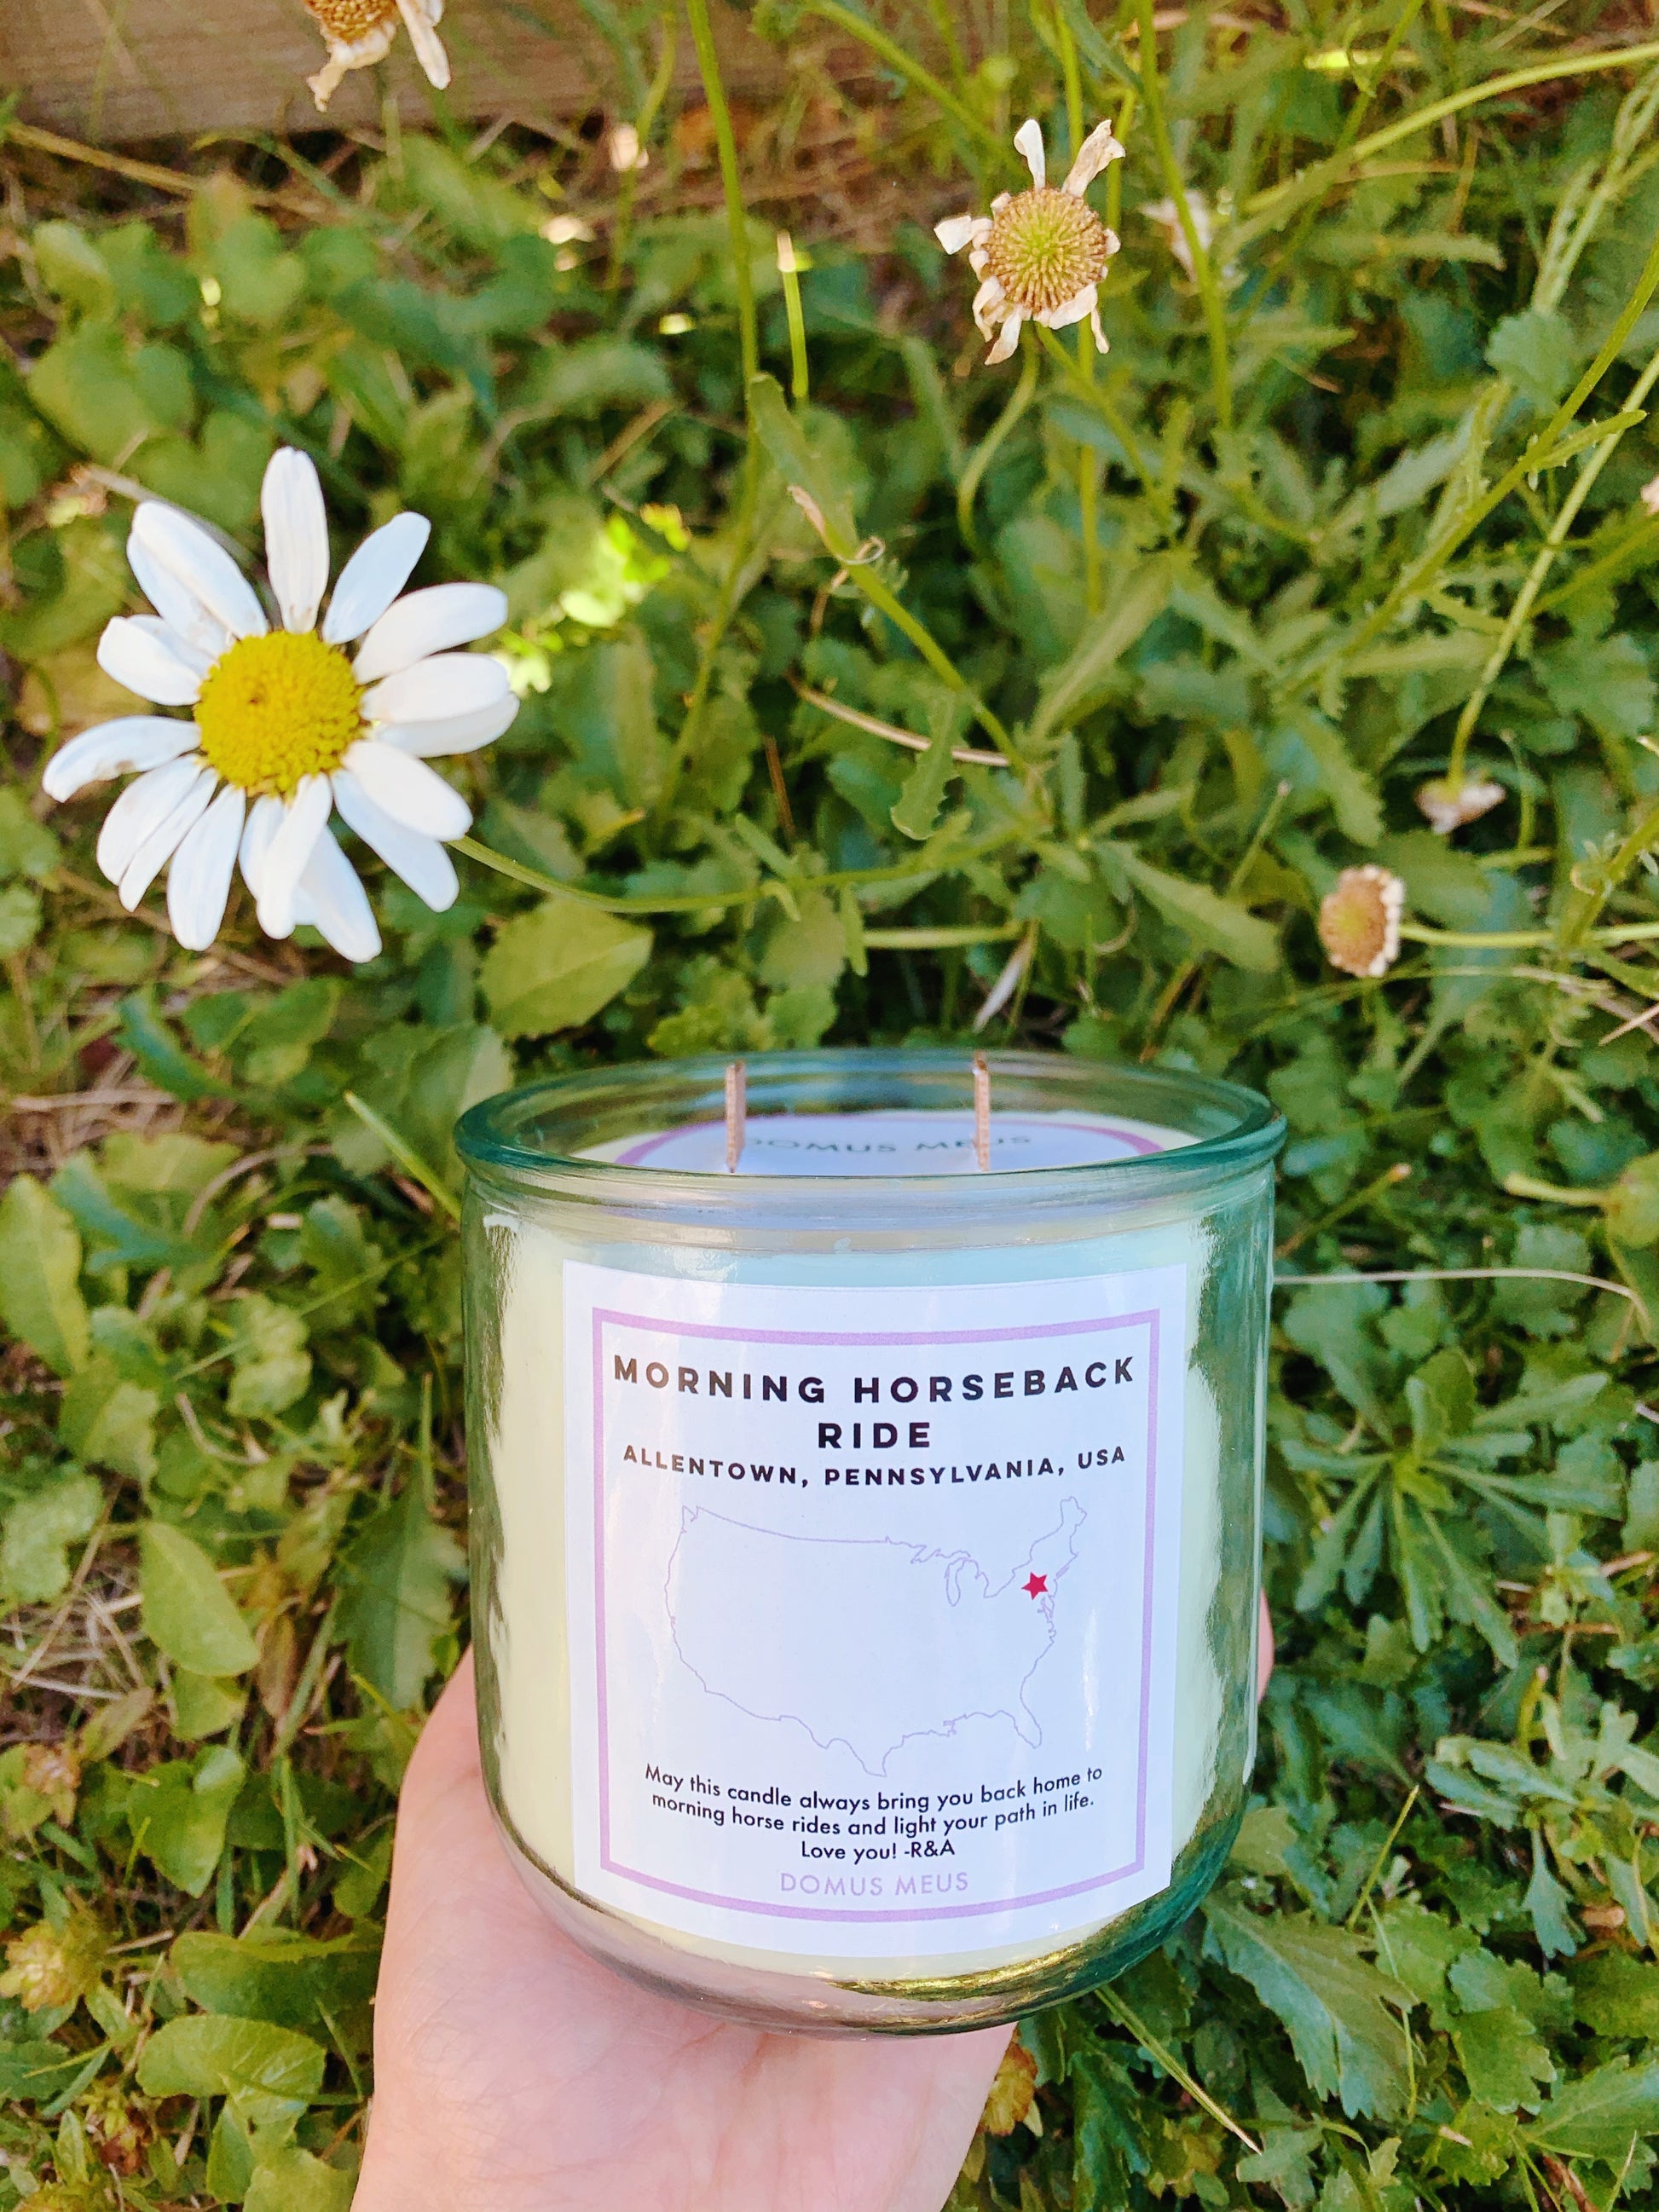 Your Personalized Candle - Domus Meus Candles